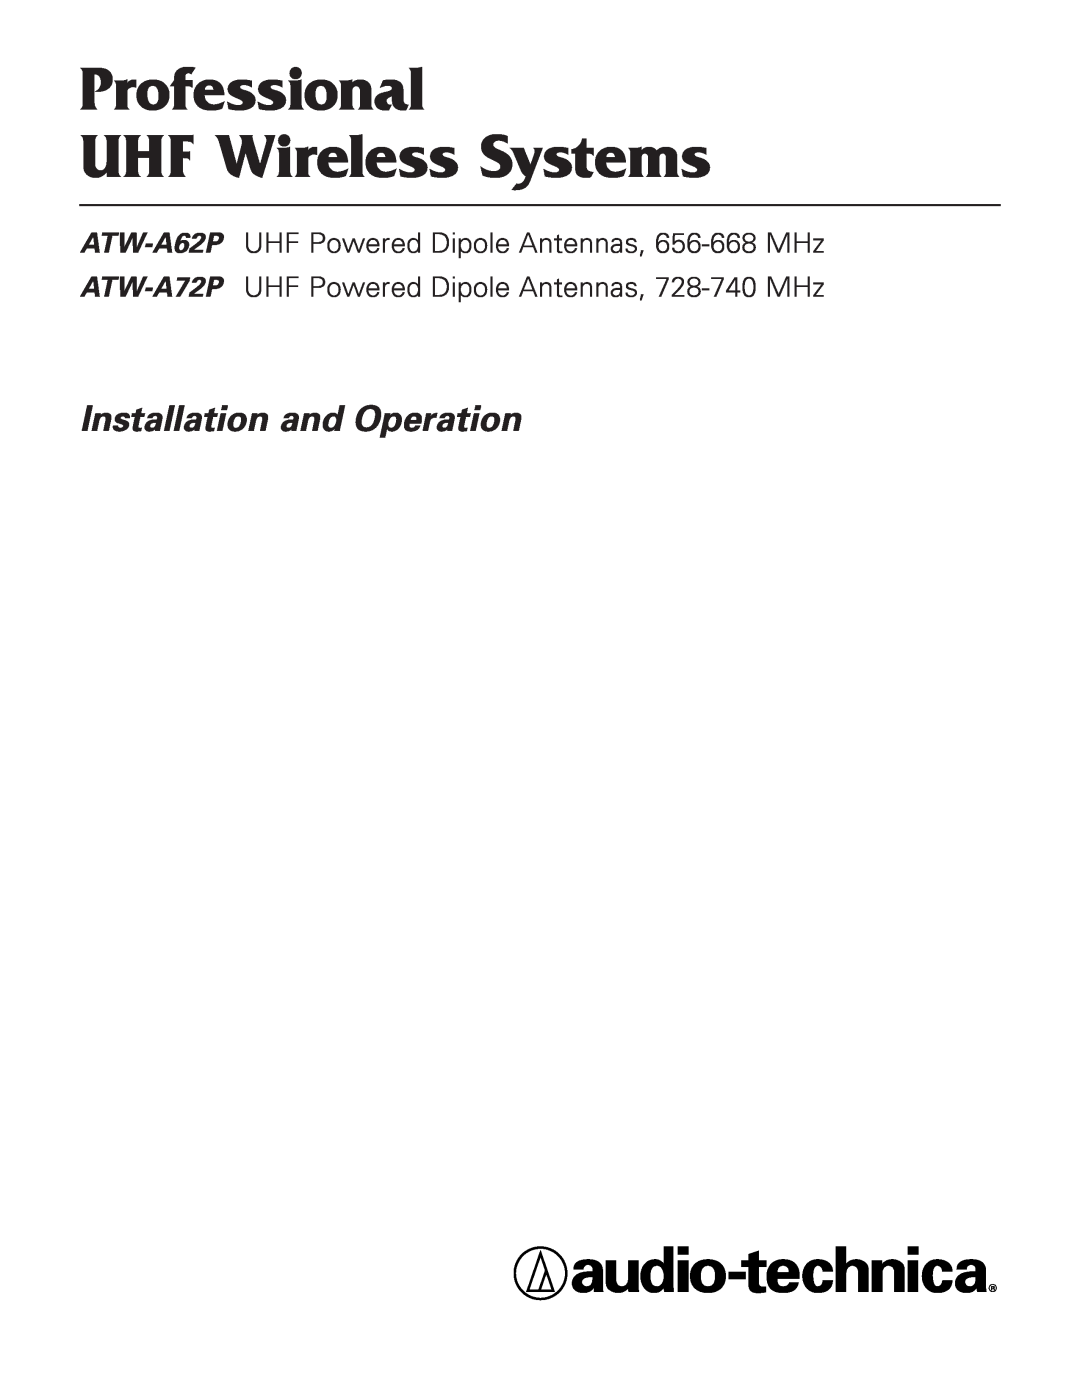 Audio-Technica ATW-A72P, ATW-A62P manual Professional UHF Wireless Systems, Installation and Operation 